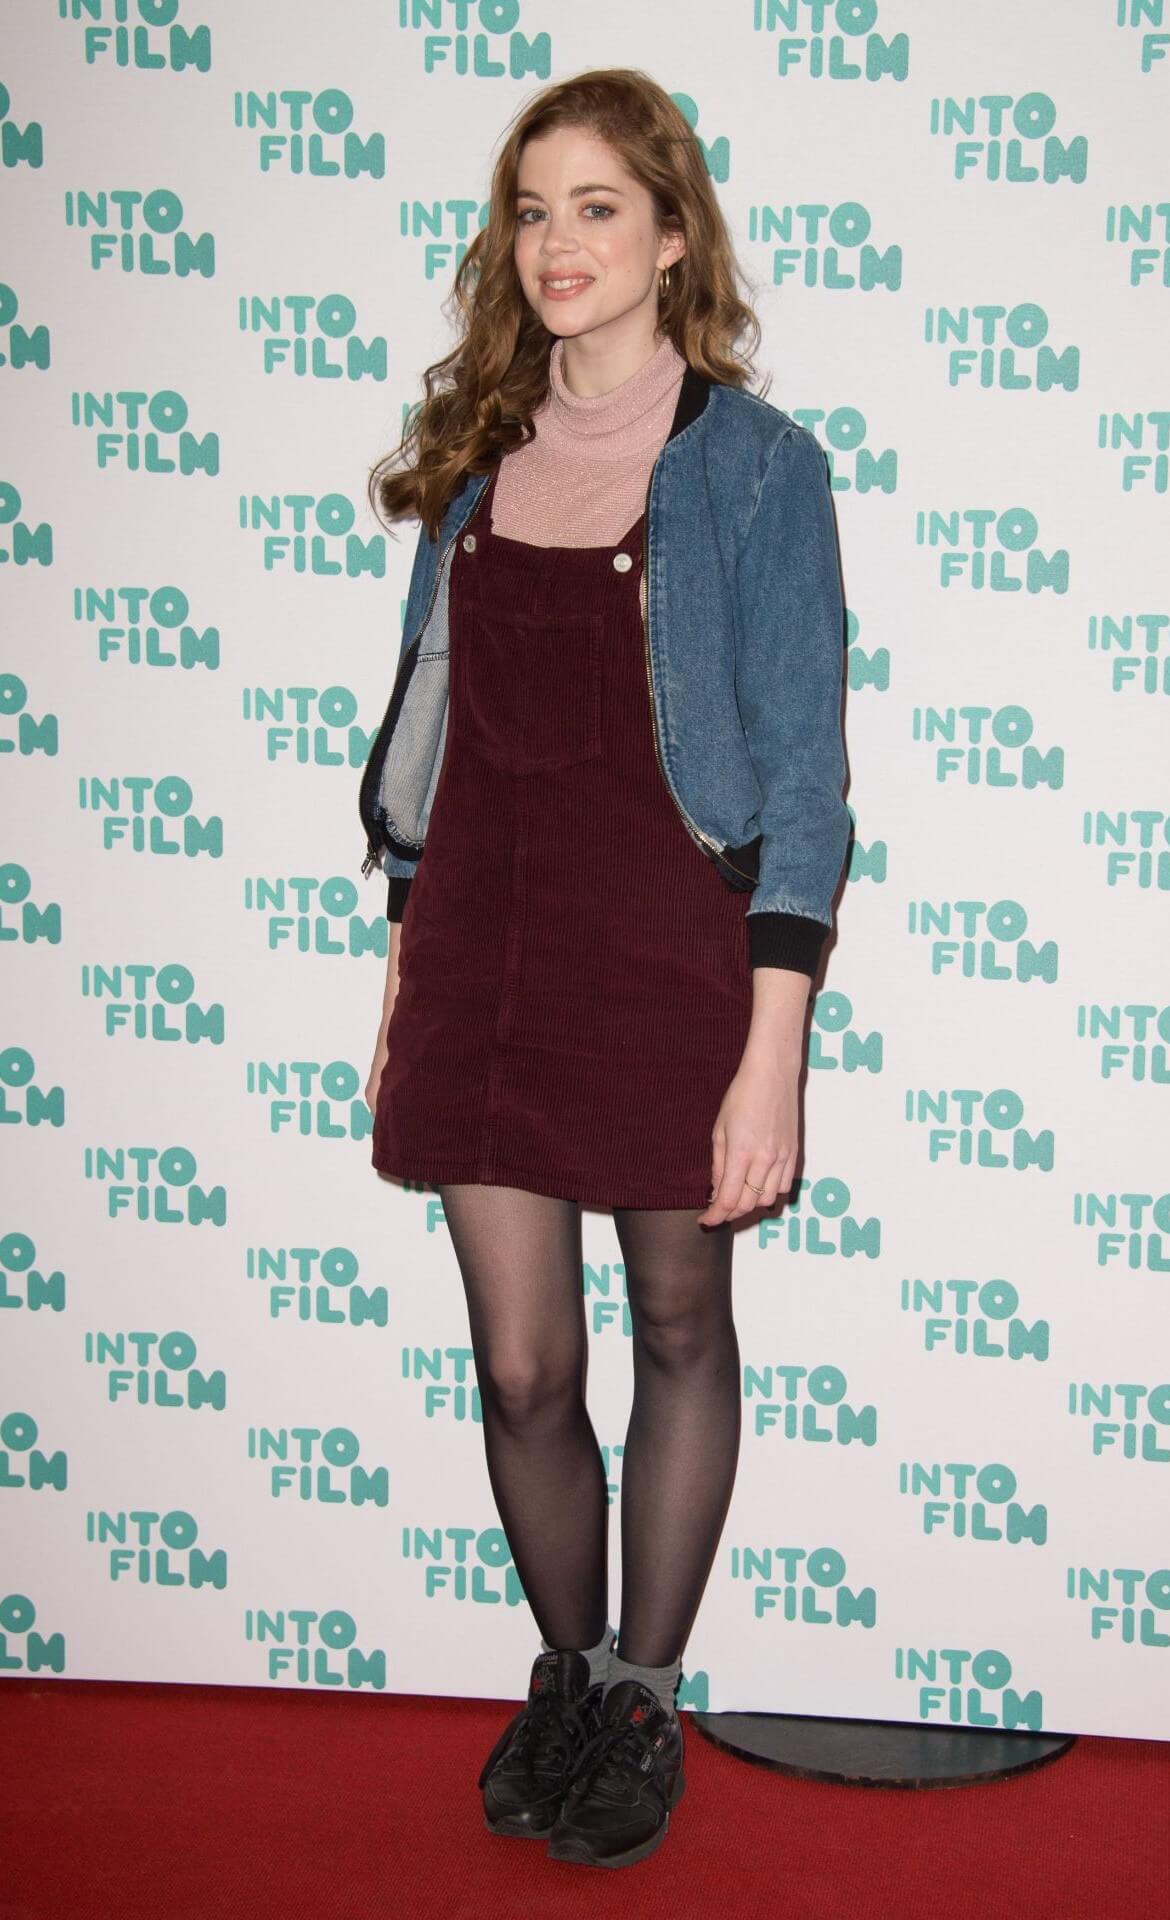 Charlotte Hope In Blue Denim Jacket With Maroon High Rise Short Dress At Into Film Awards in London, UK